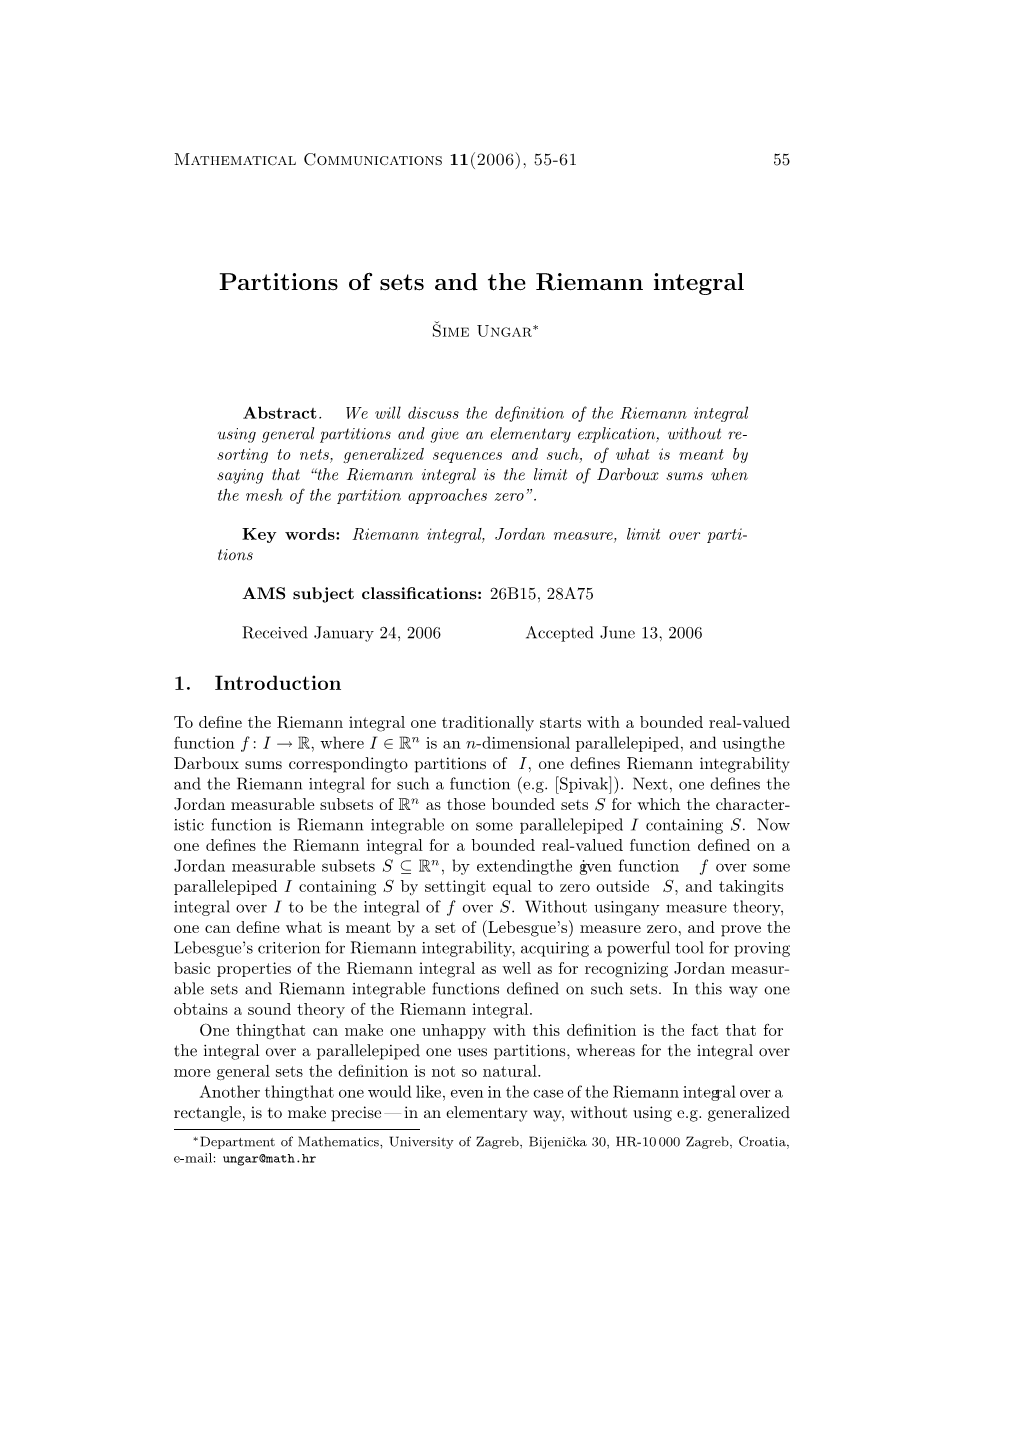 Partitions of Sets and the Riemann Integral